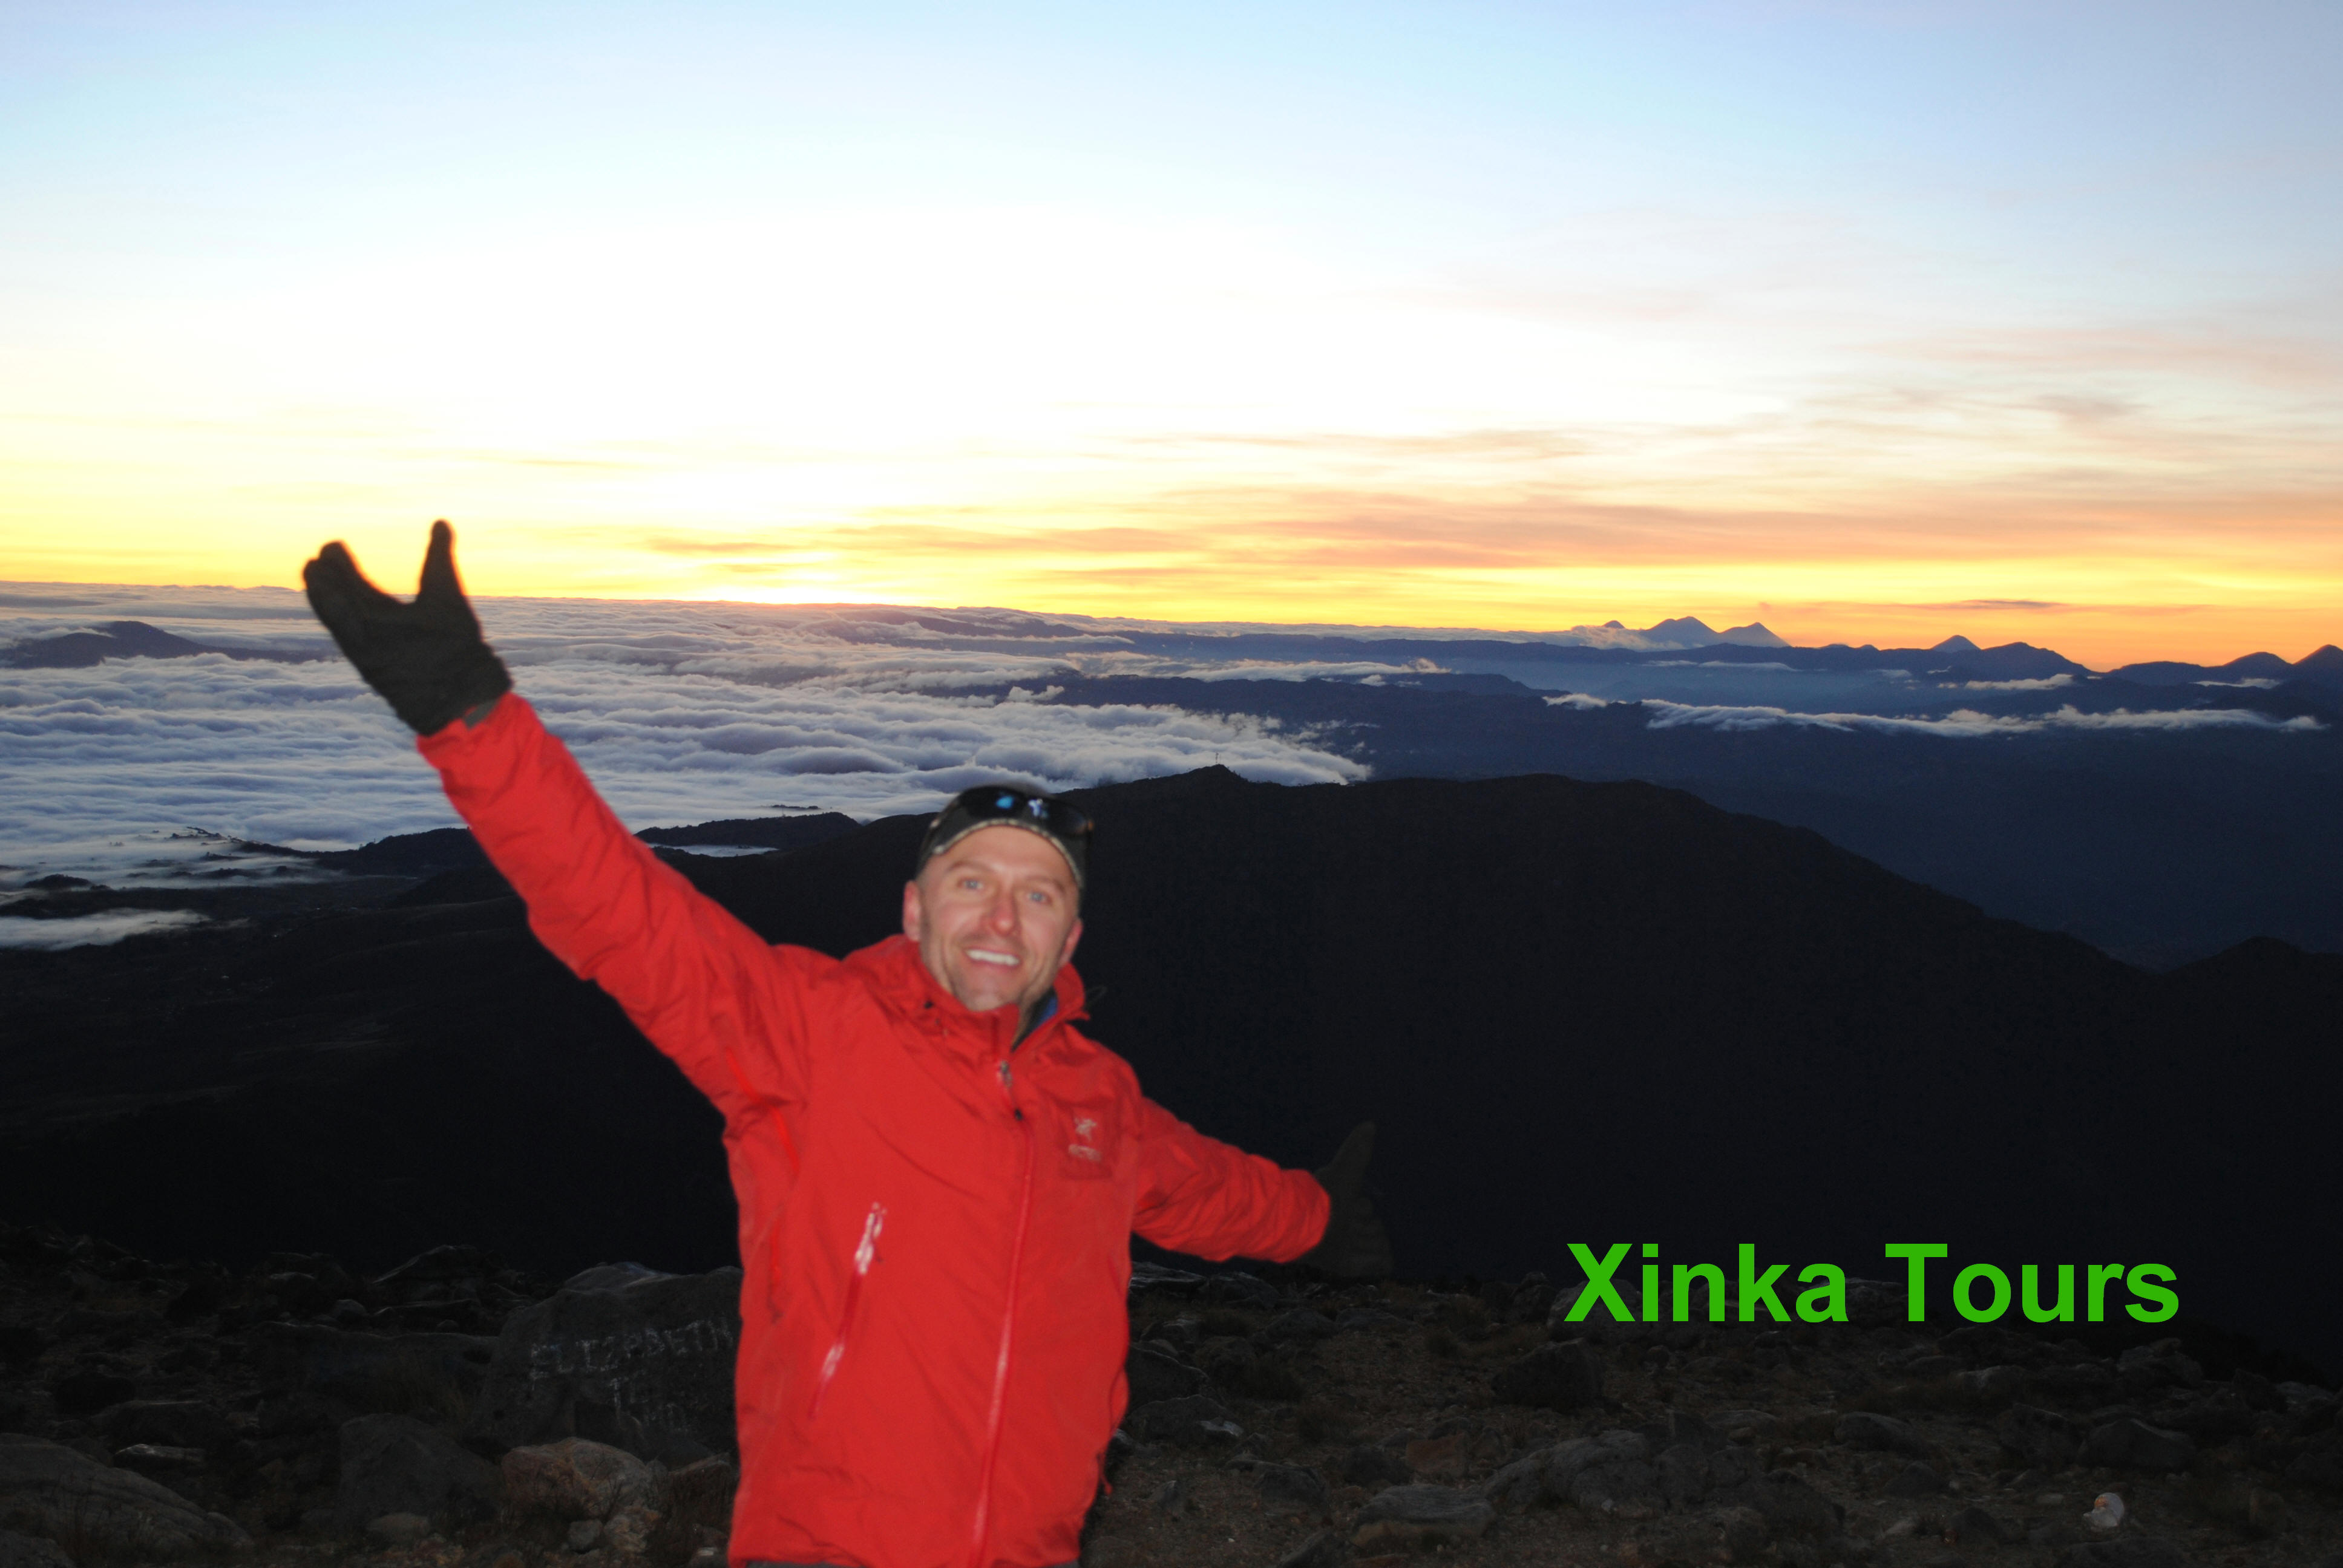 Xinka Tours and a cold sunrise at the top of the Tajumulco volcano.